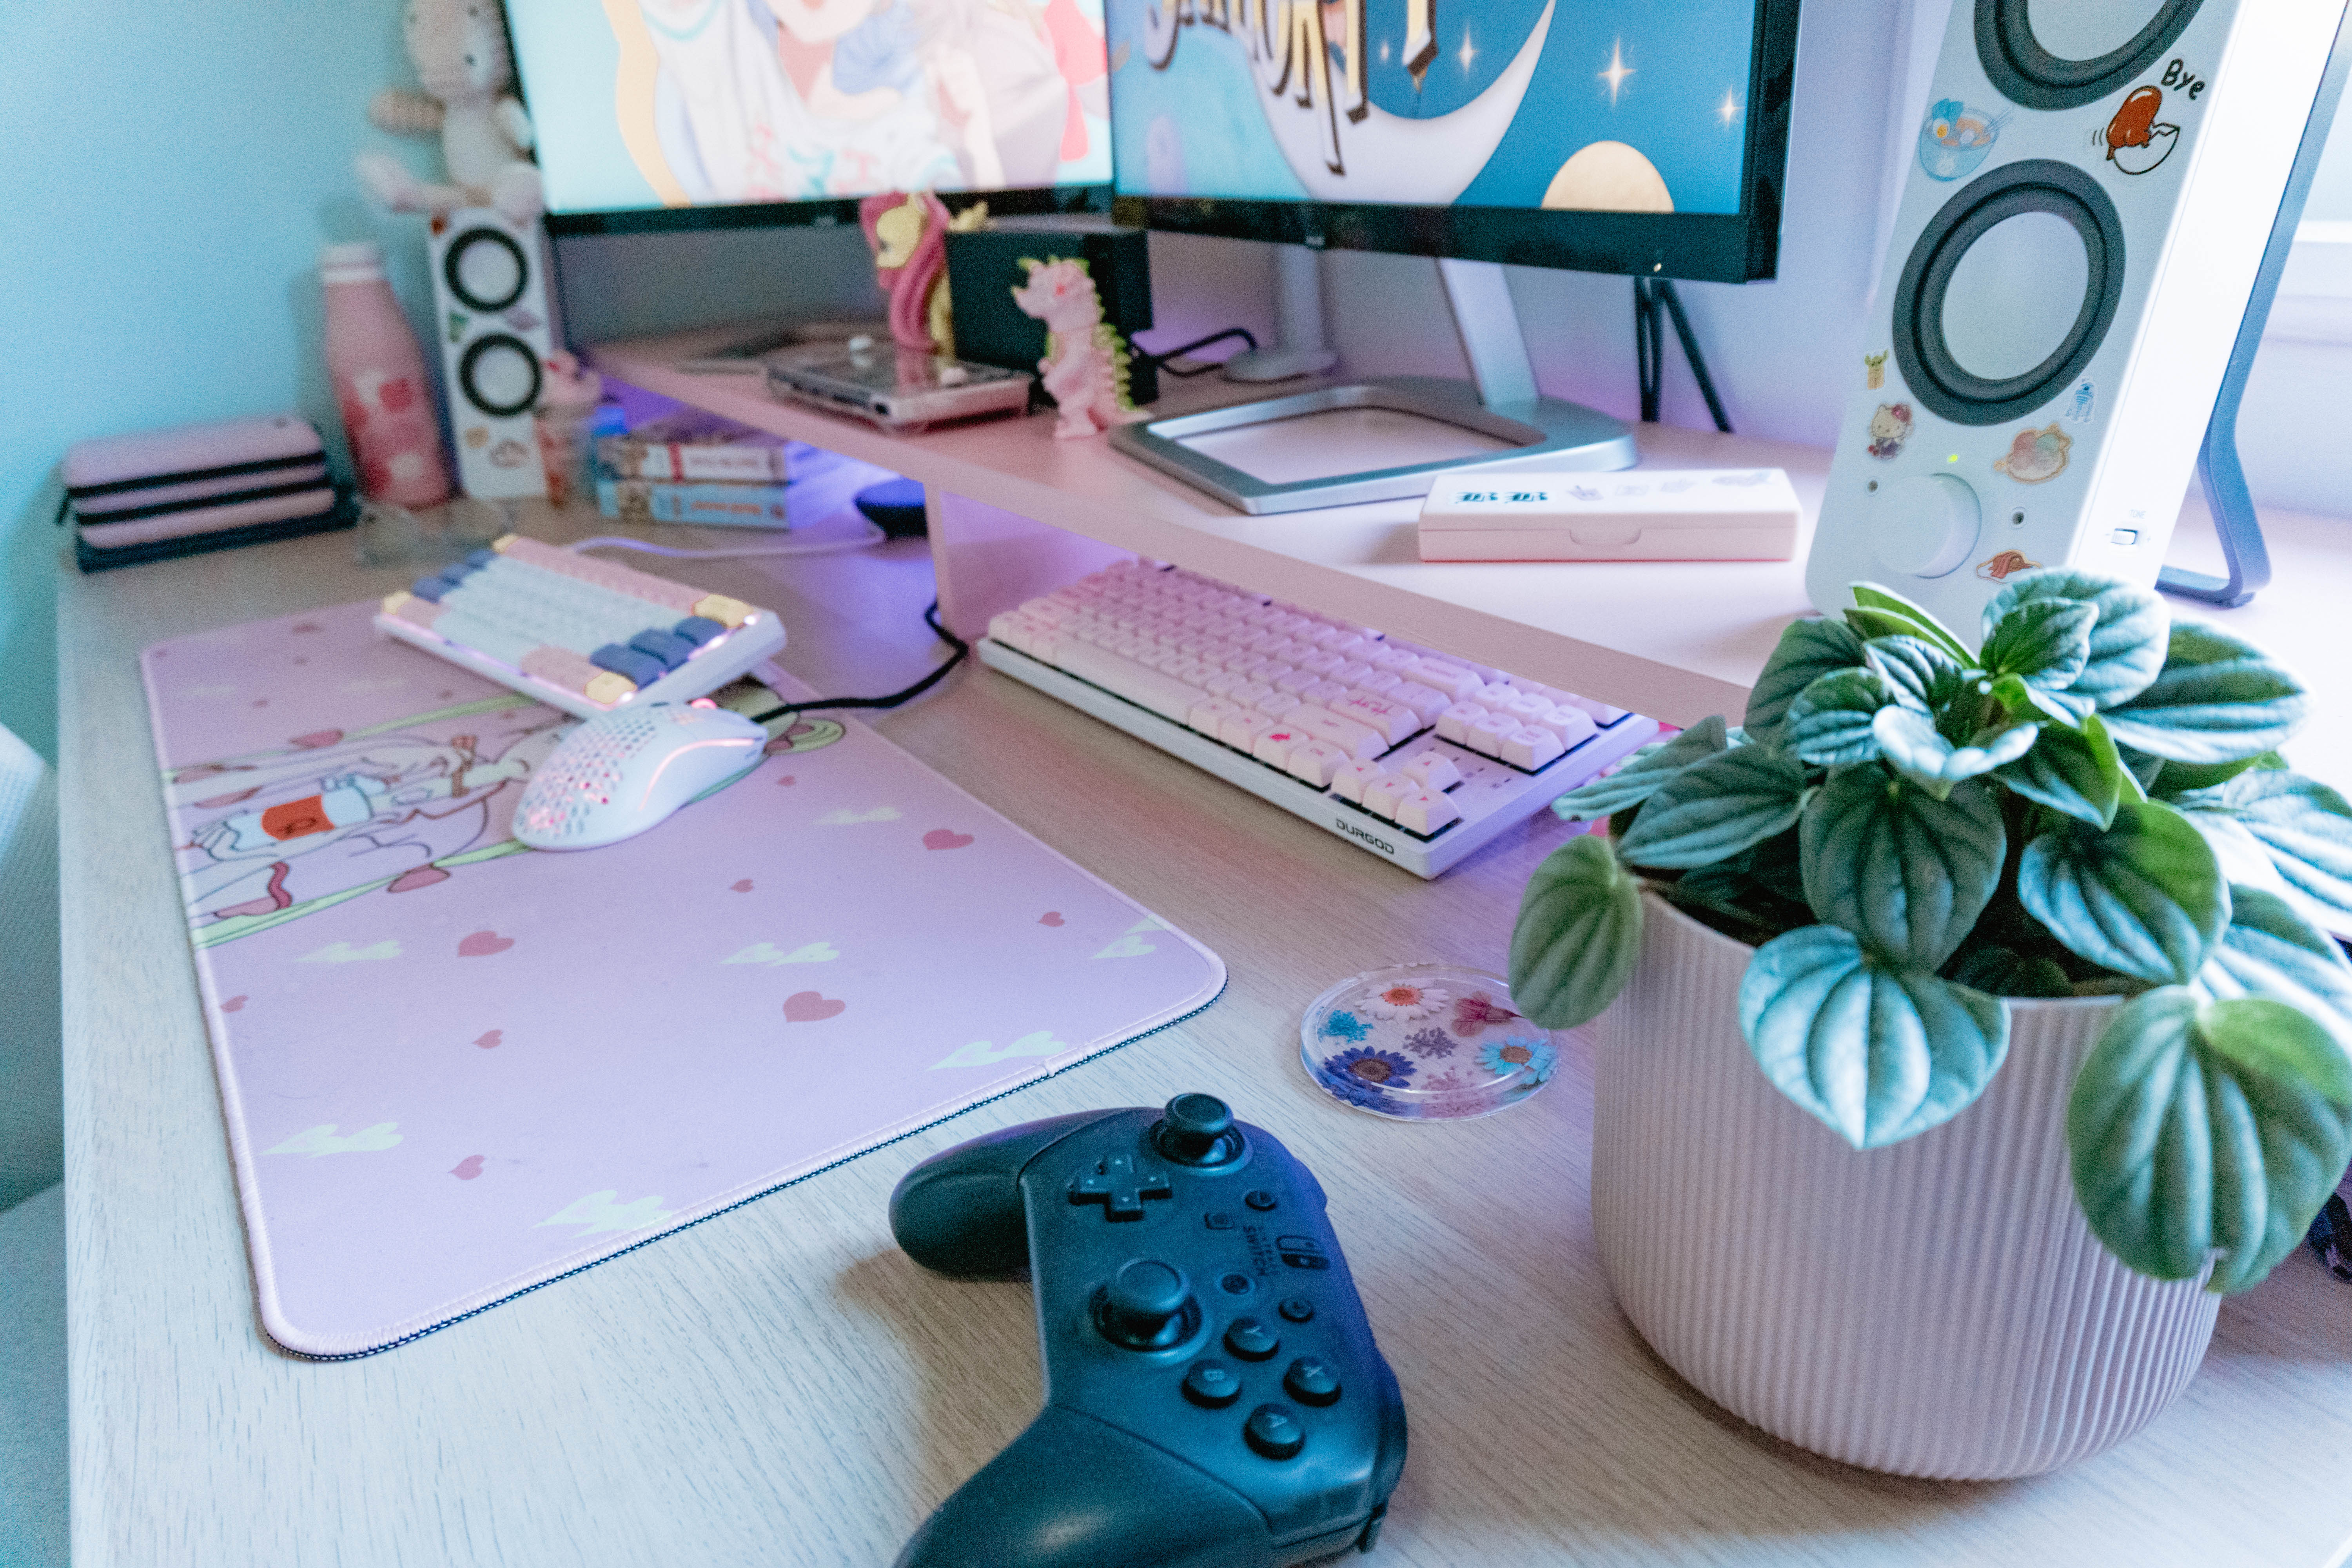 A personable, invitingly cluttered desktop with a pink floral theme for it accesories.